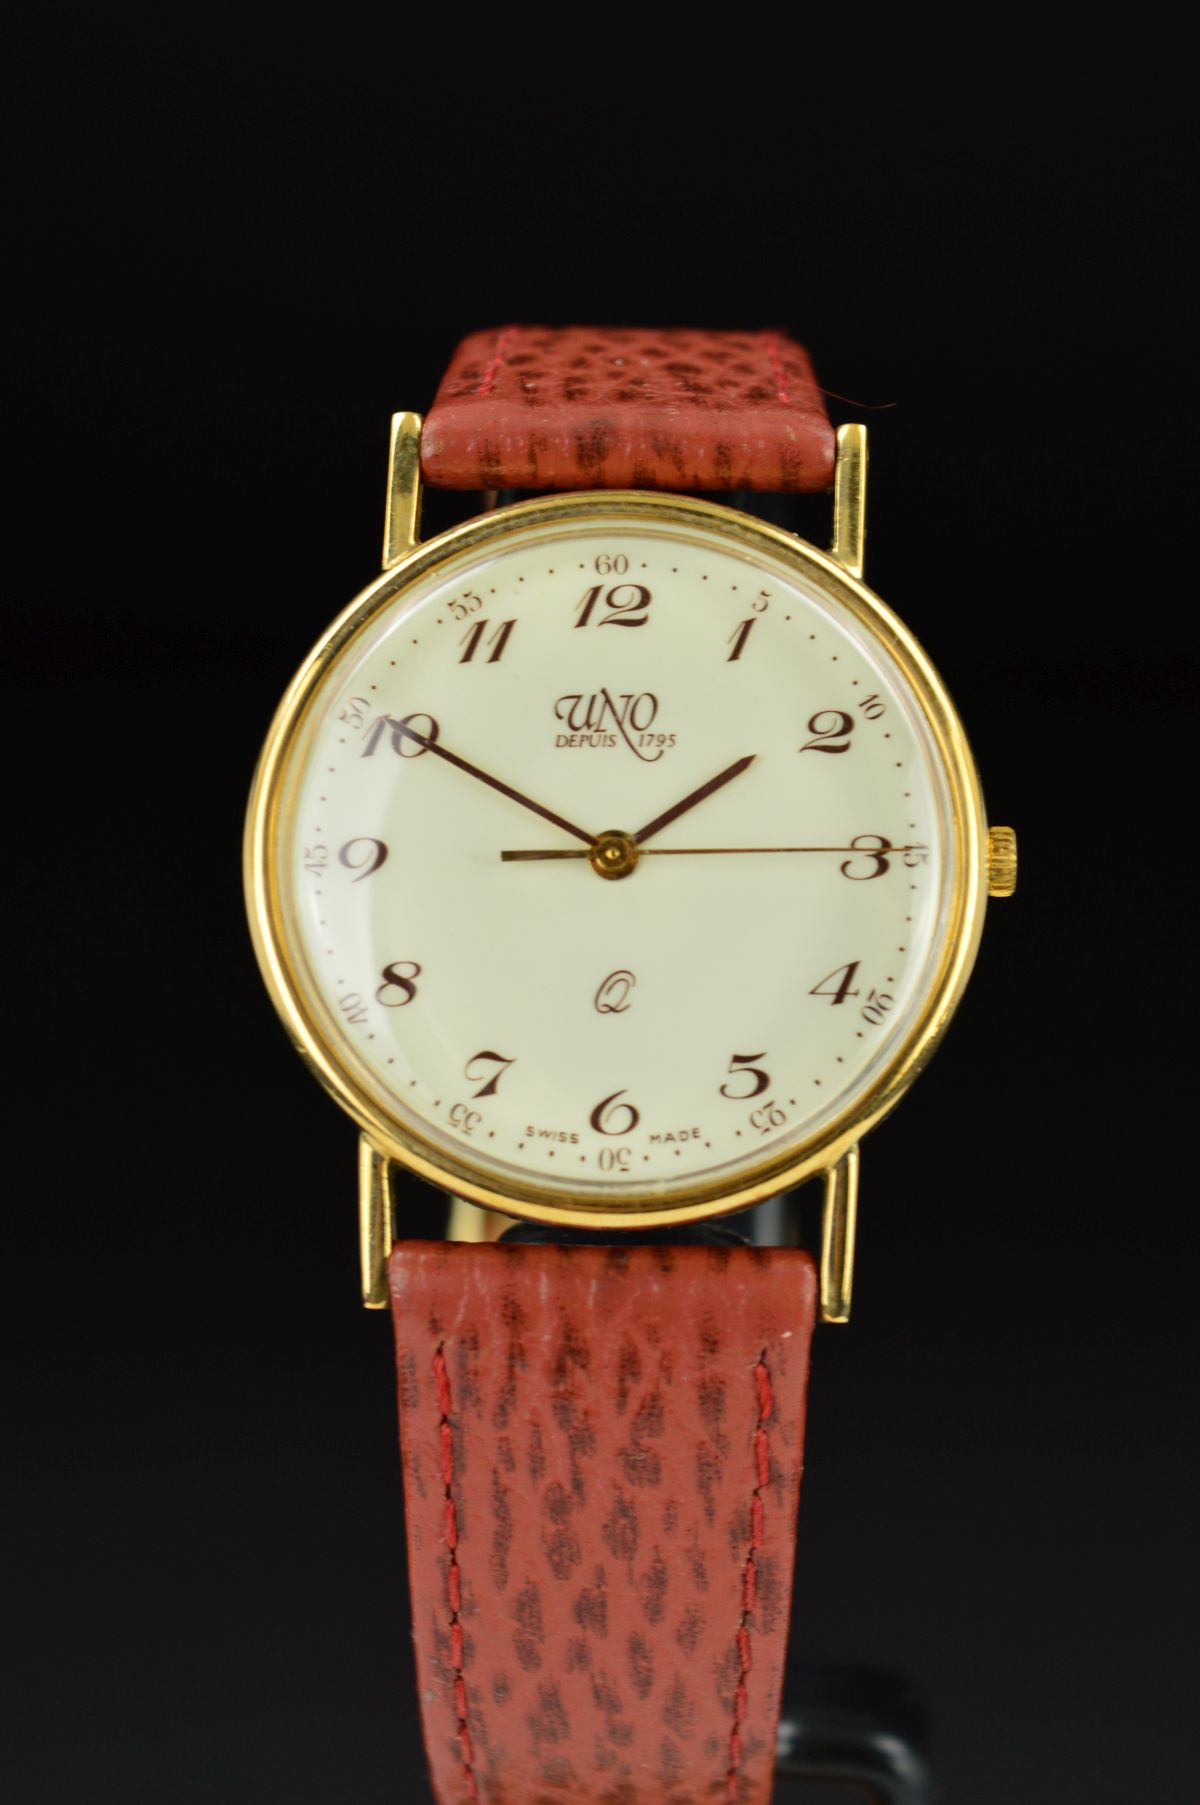 A MID TO LATE 20TH CENTURY 9CT GOLD GENT'S UNO WRISTWATCH, cream dial with Arabic numerals, Quartz